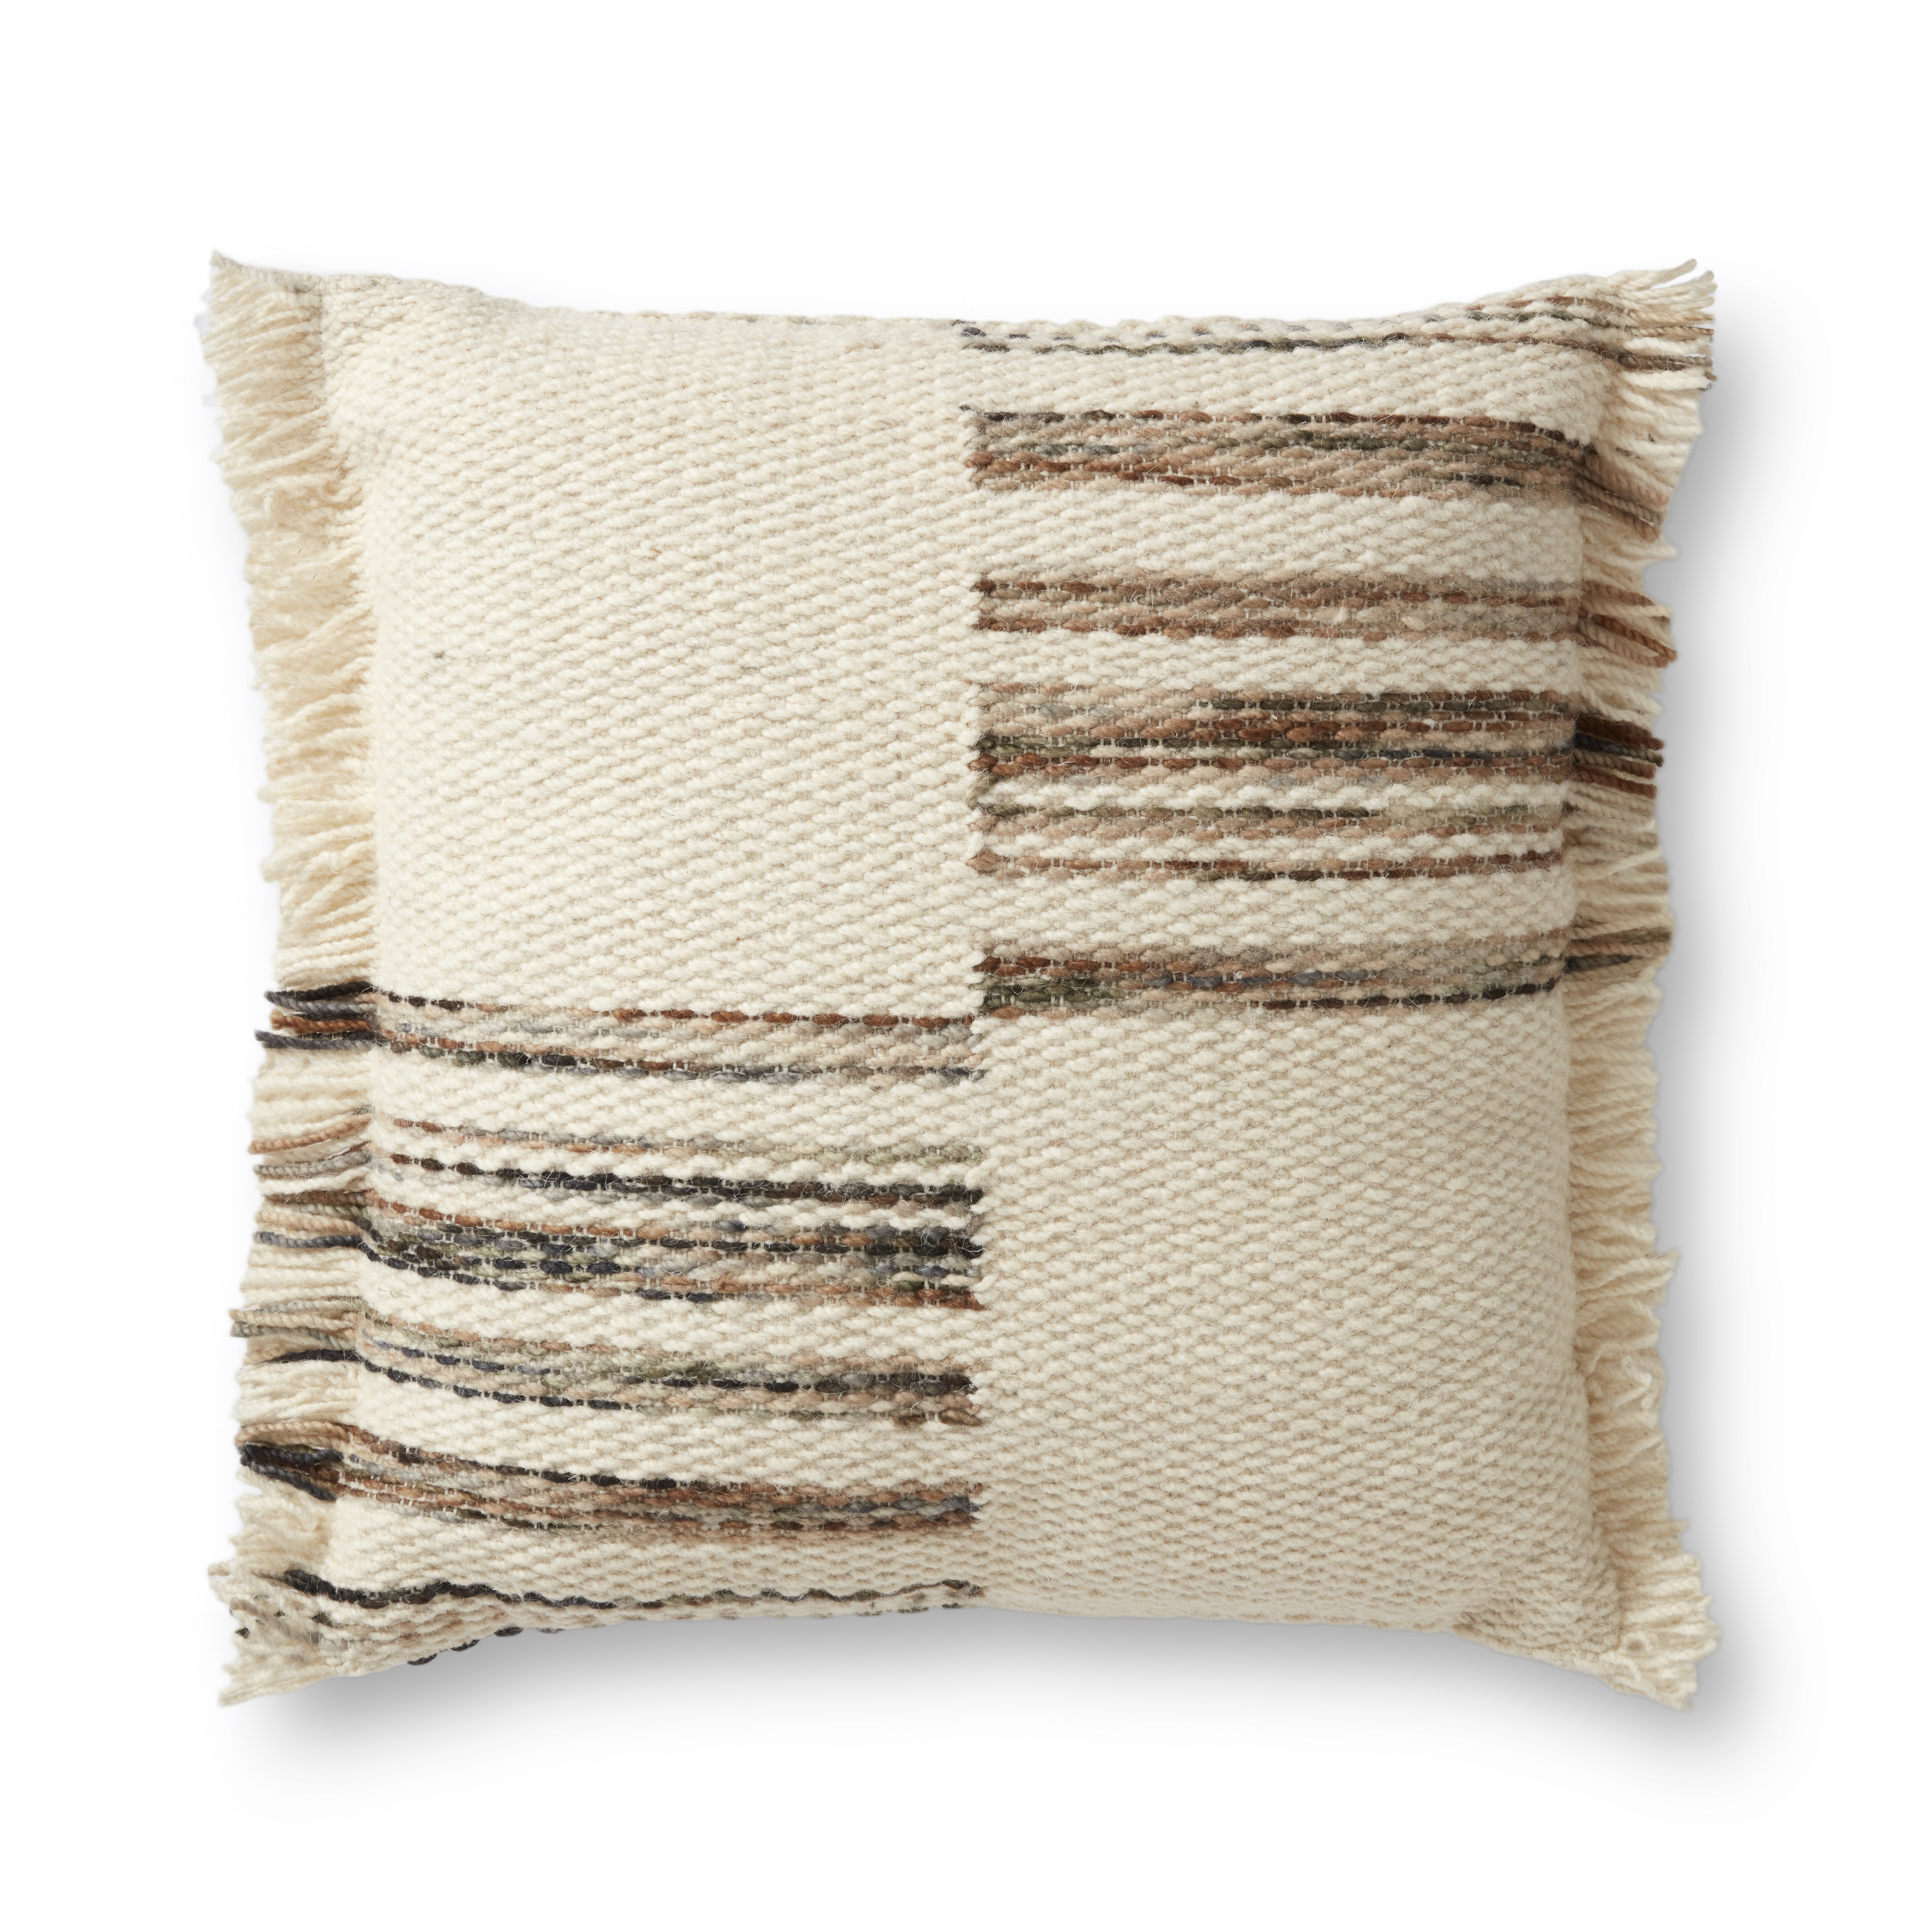 PILLOWS PMH0005 NATURAL / MULTI 22" x 22" Cover w/Poly - Magnolia Home by Joana Gaines Crafted by Loloi Rugs